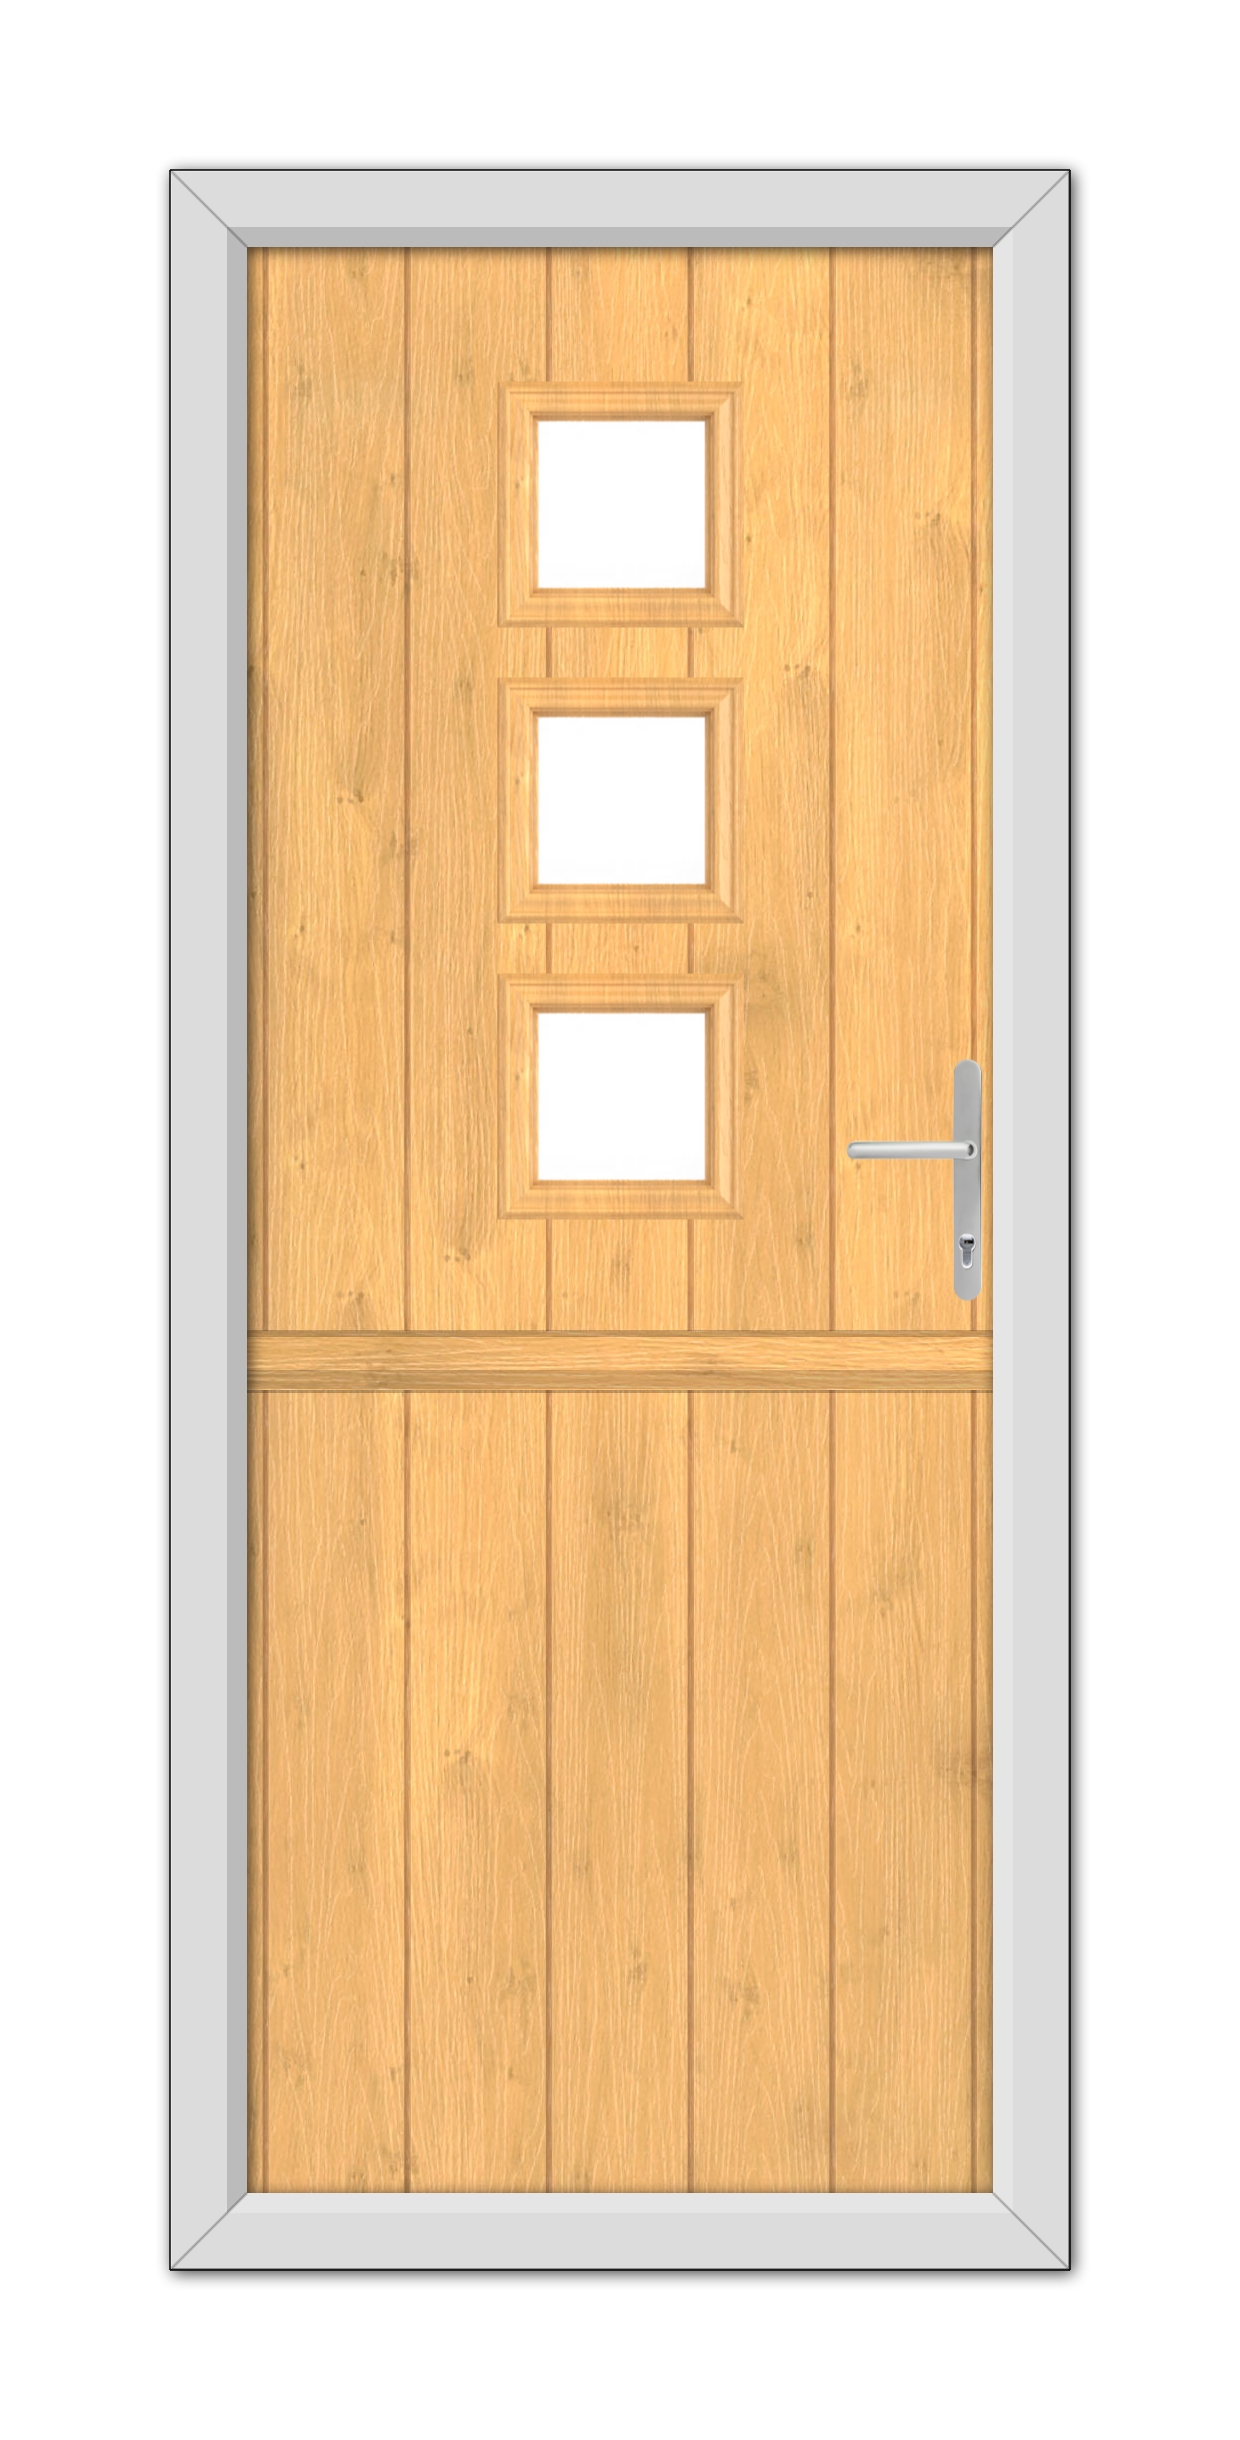 A modern Irish Oak Montrose Stable Composite Door 48mm Timber Core with four rectangular windows and a metal handle, framed within a silver metal doorframe, isolated on a white background.